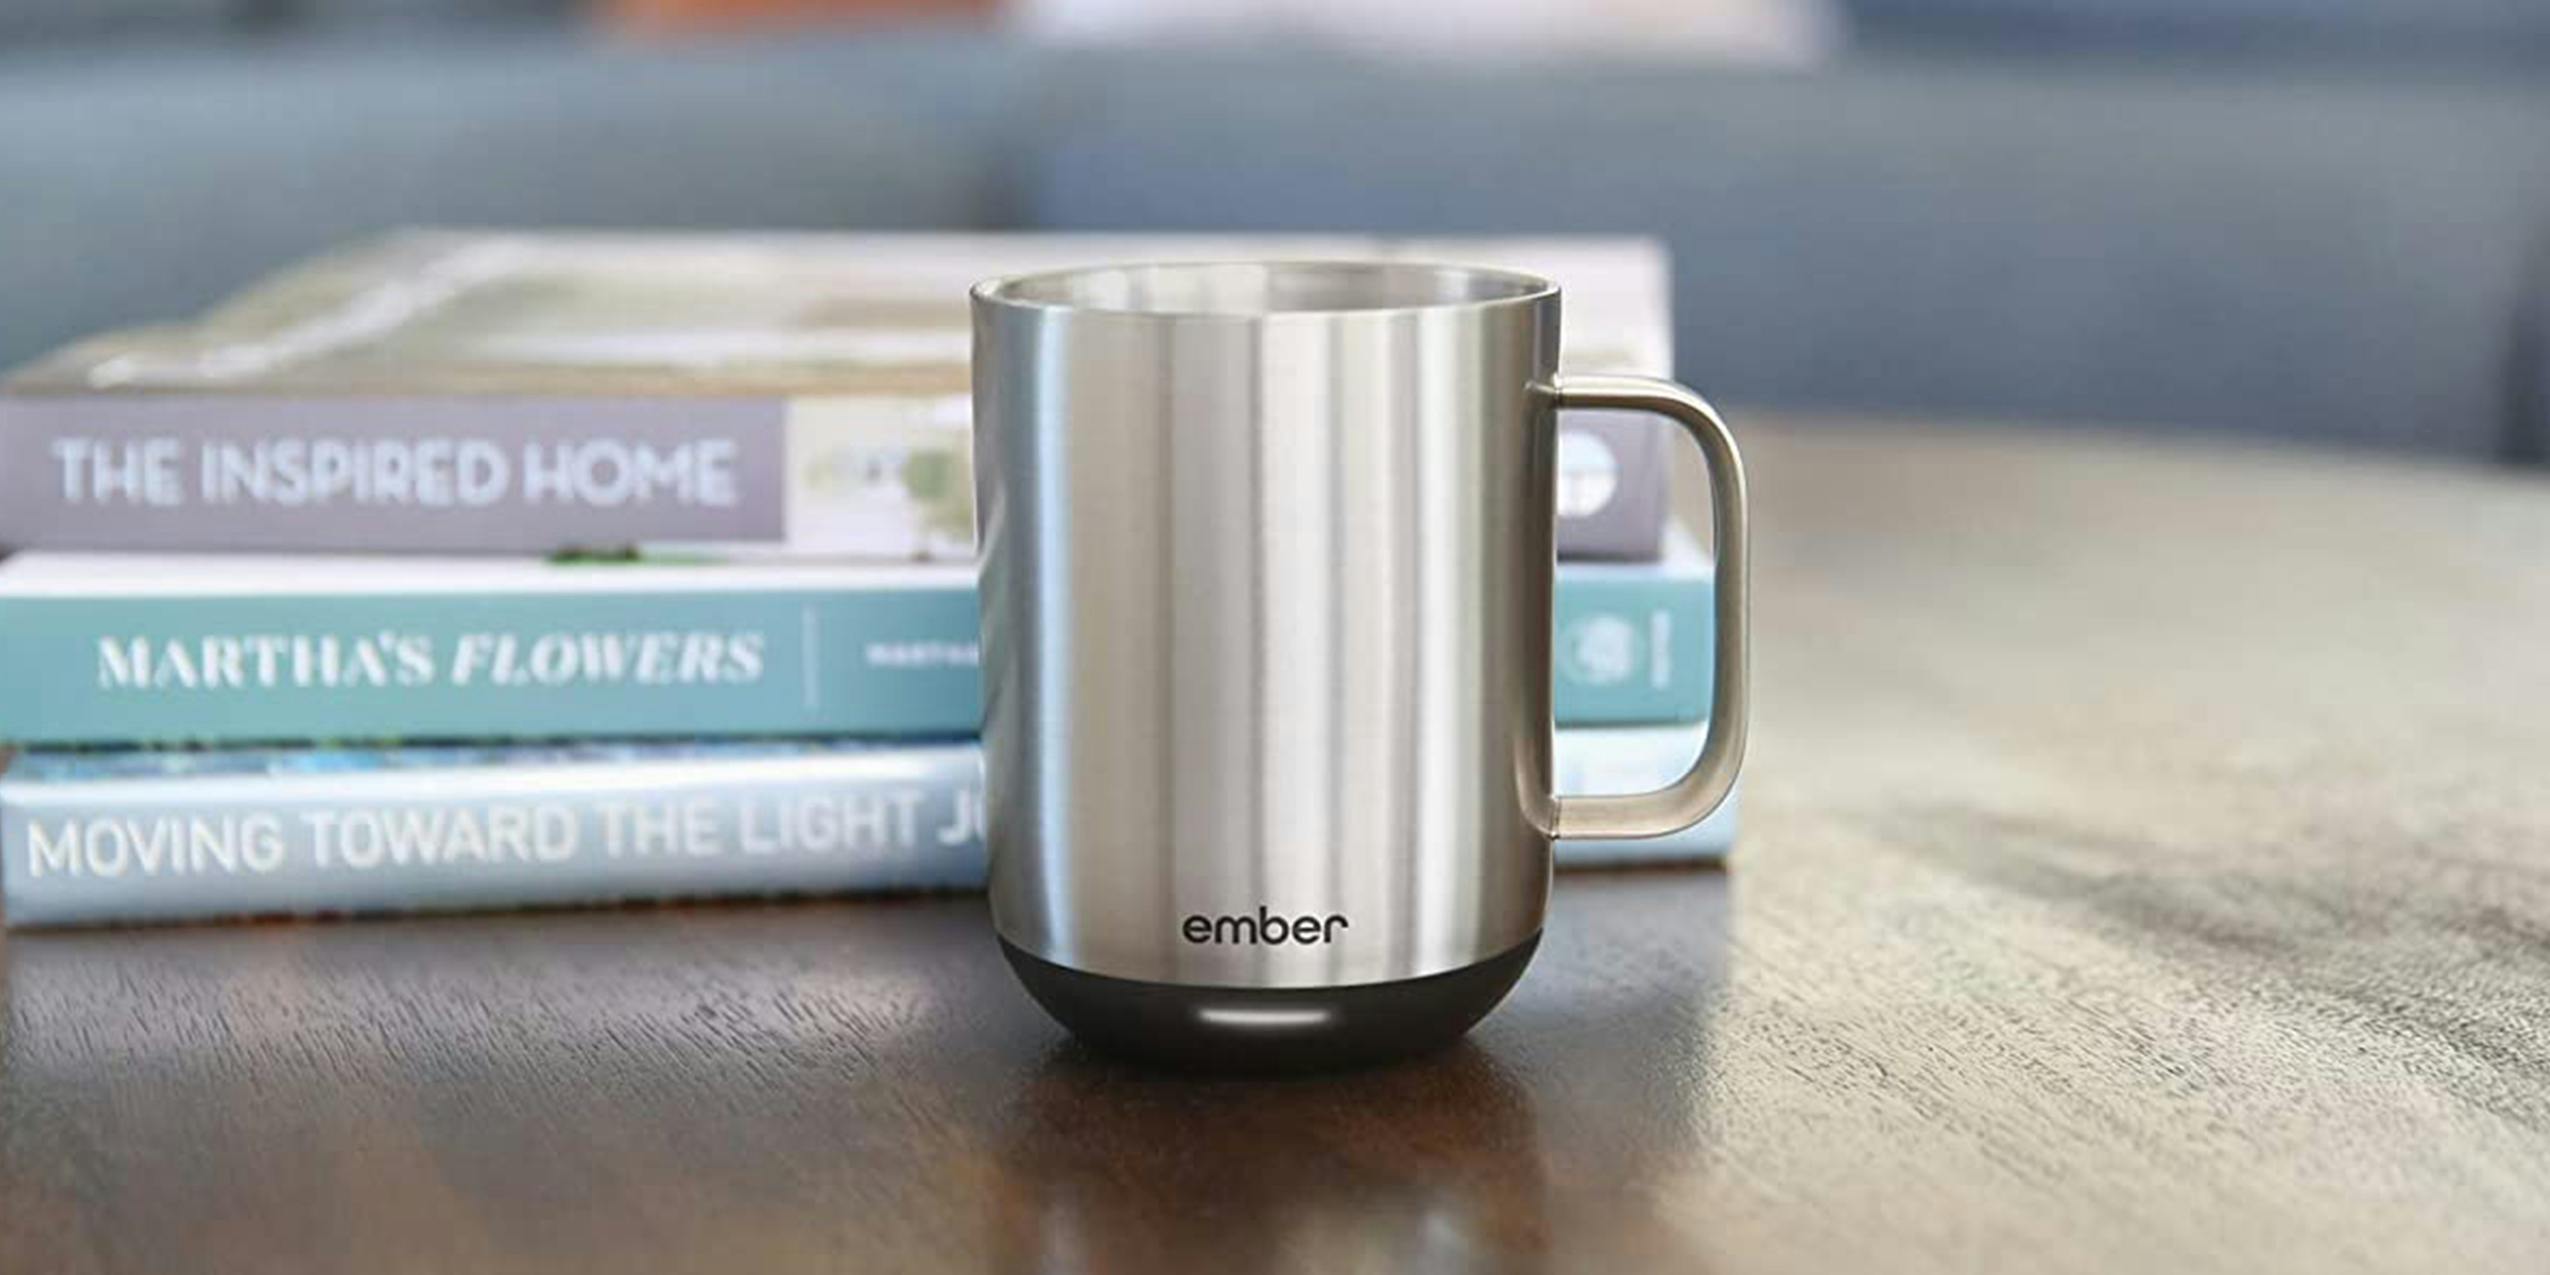 The Ember Mug placed on a coffee table.